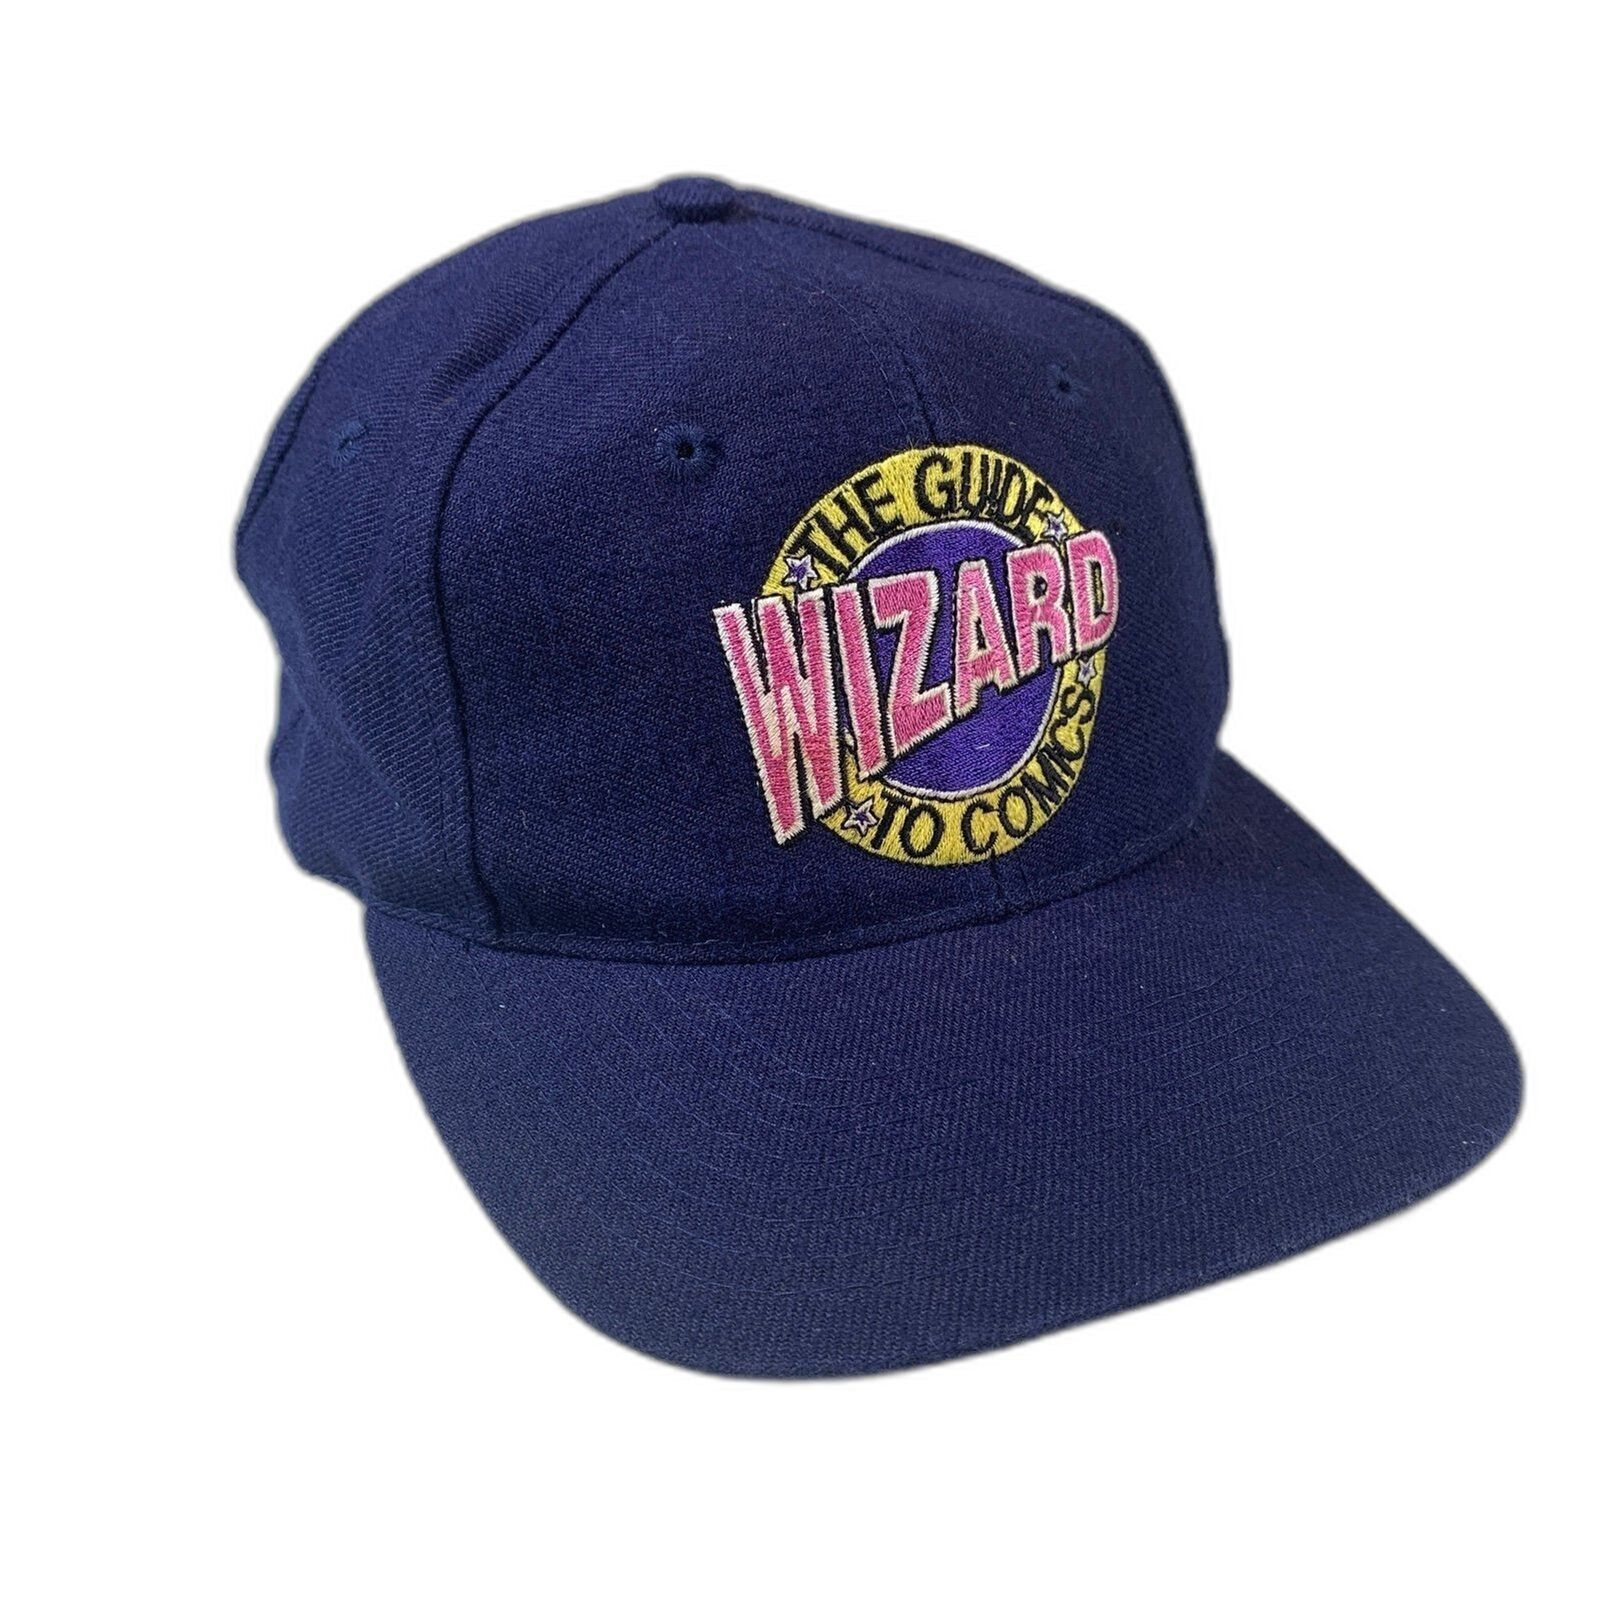 WIZARD Magazine: The Guide to Comics vintage baseball cap hat SnapBack 90’s